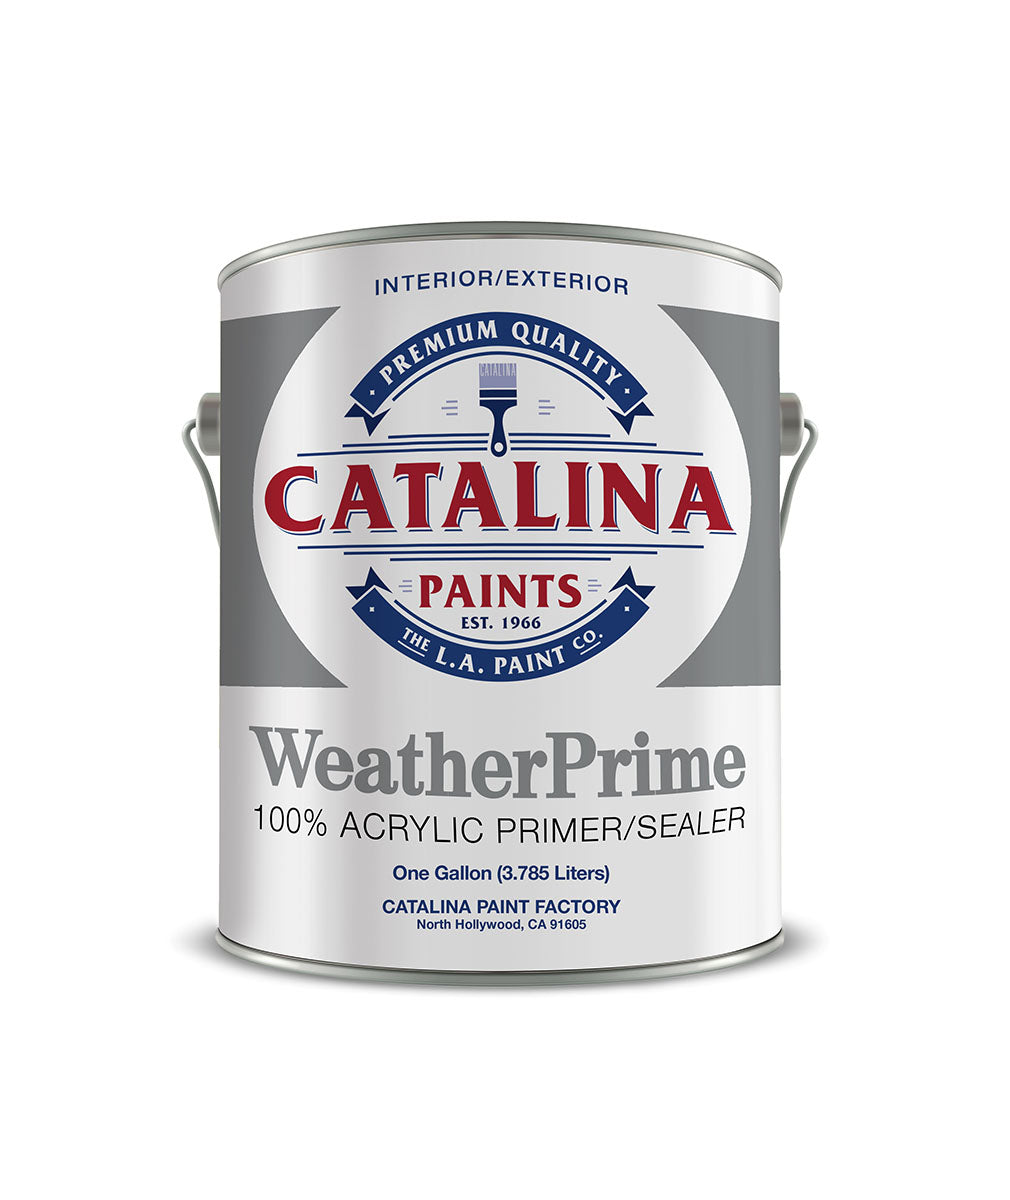 WeatherPrime 100% Acrylic Primer C123, available at Catalina Paints in CA.